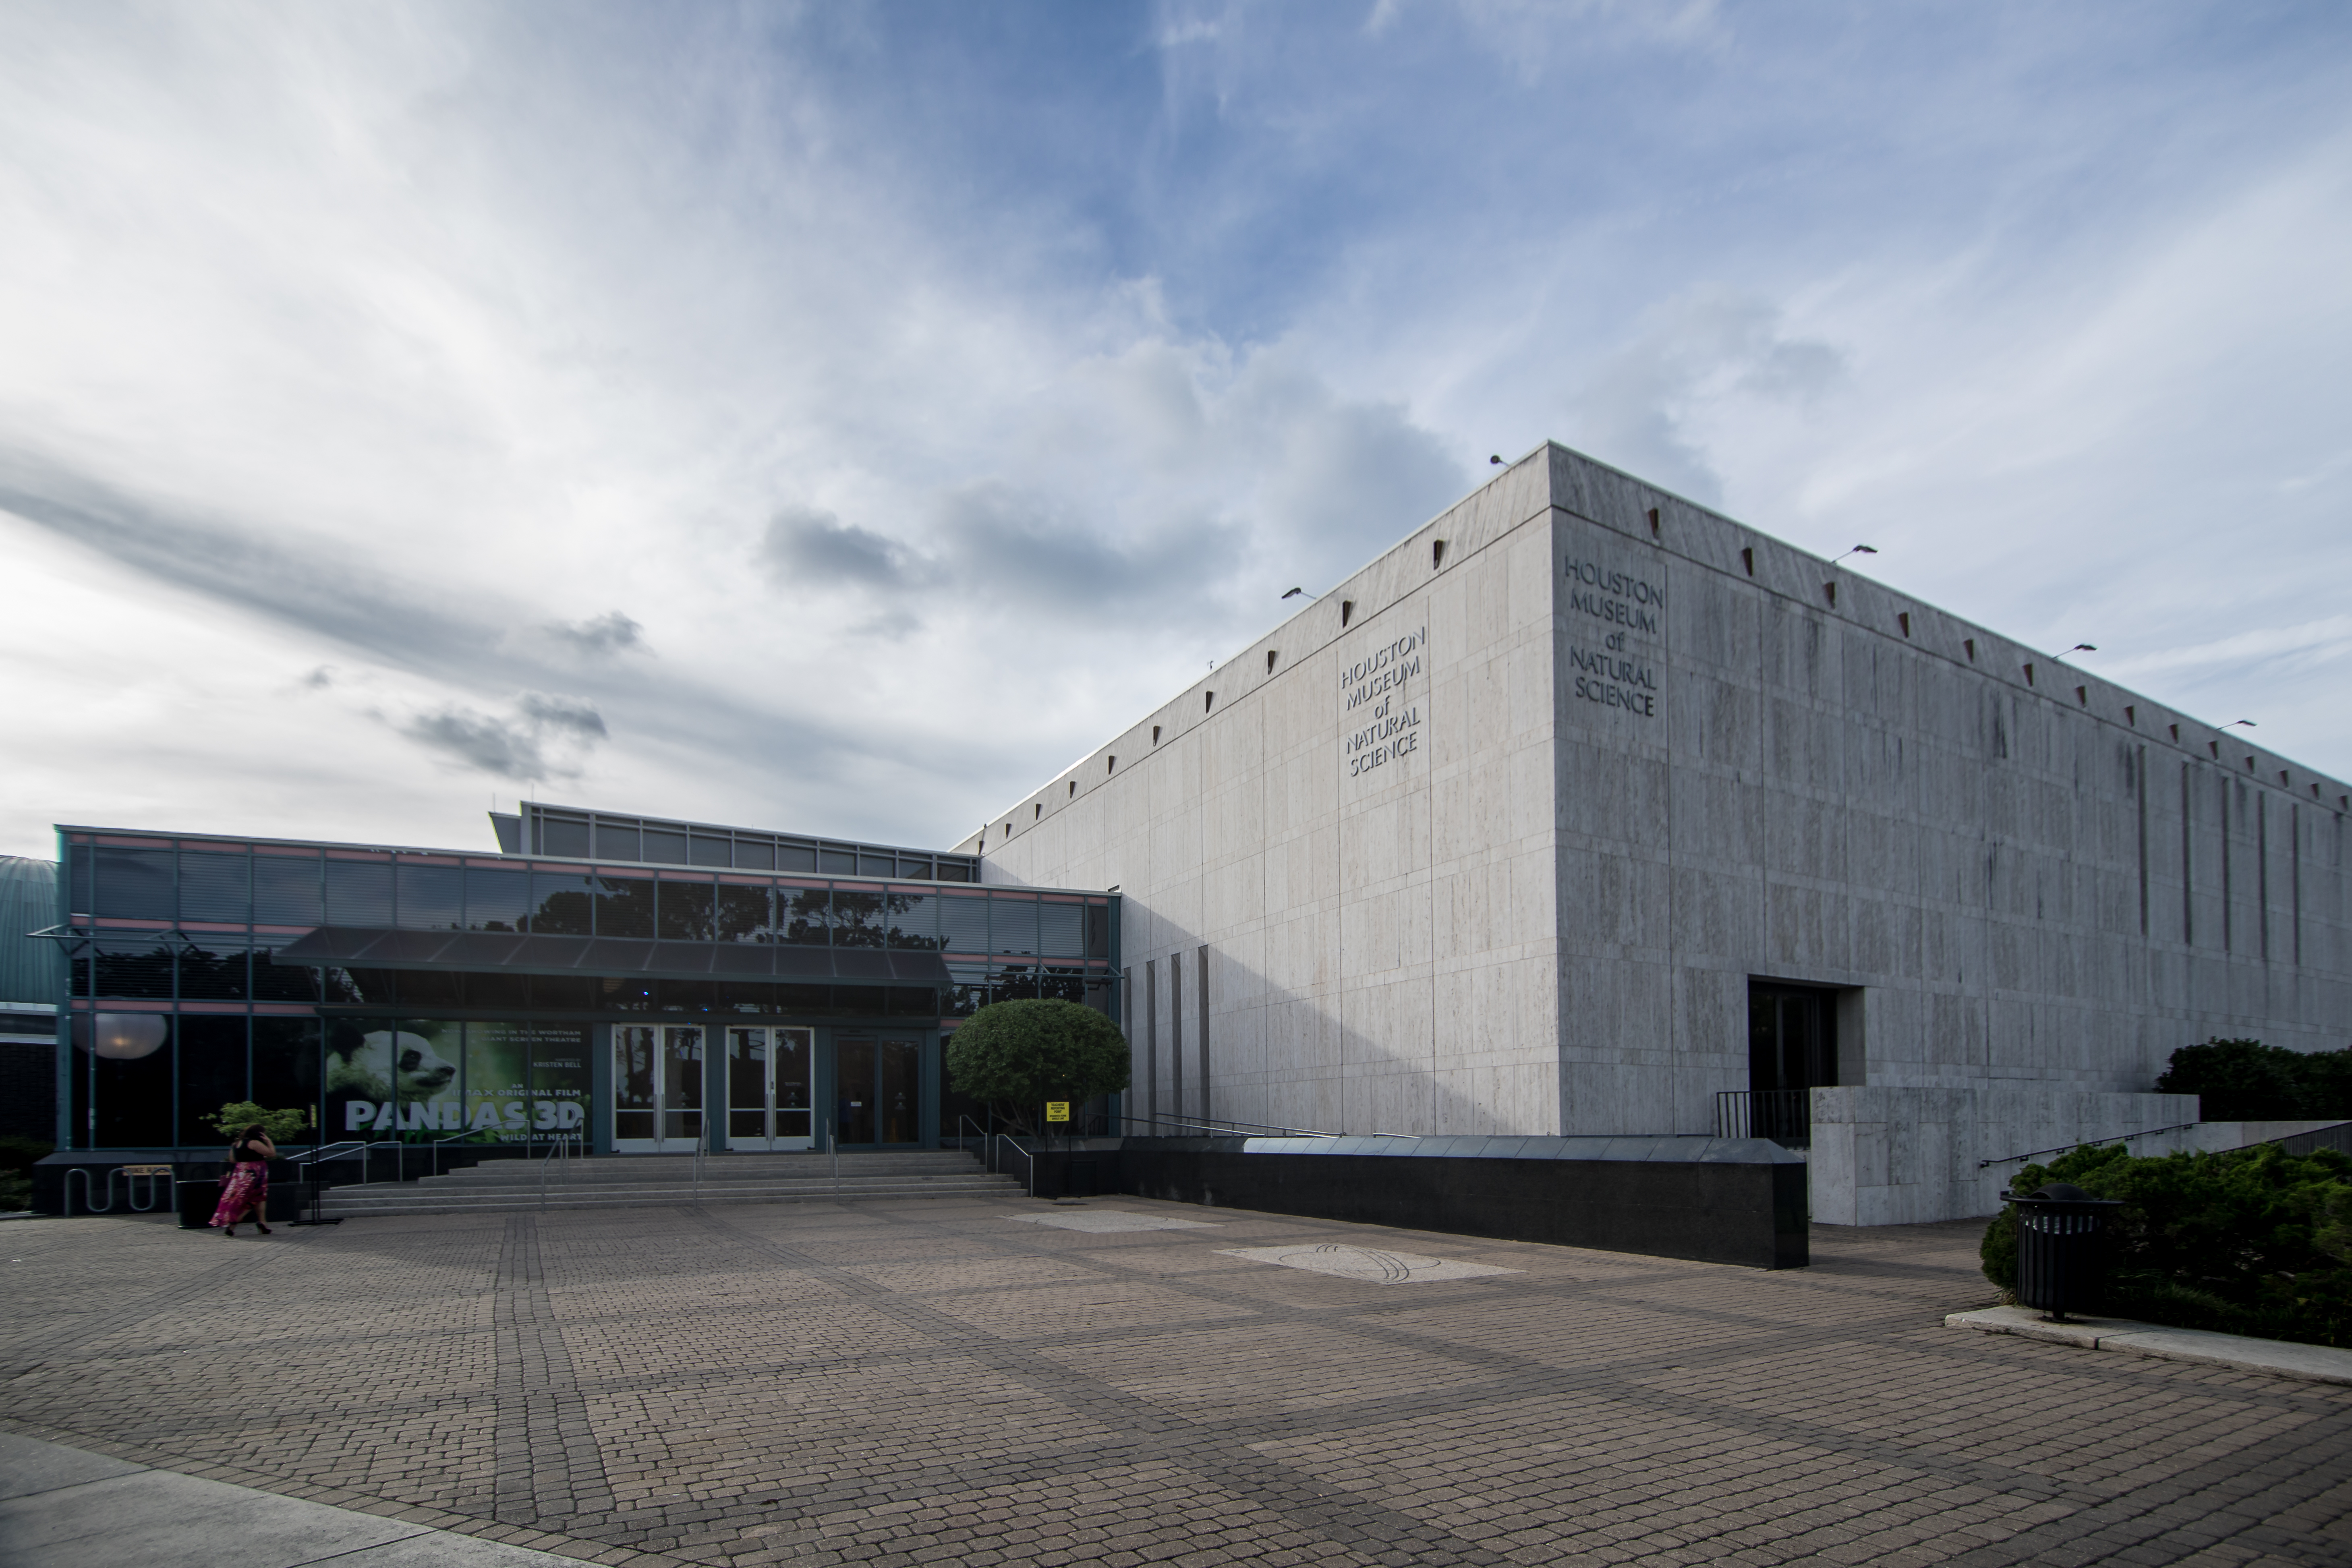 A concrete building in front of a partially cloudy sky. Letters on the building read 